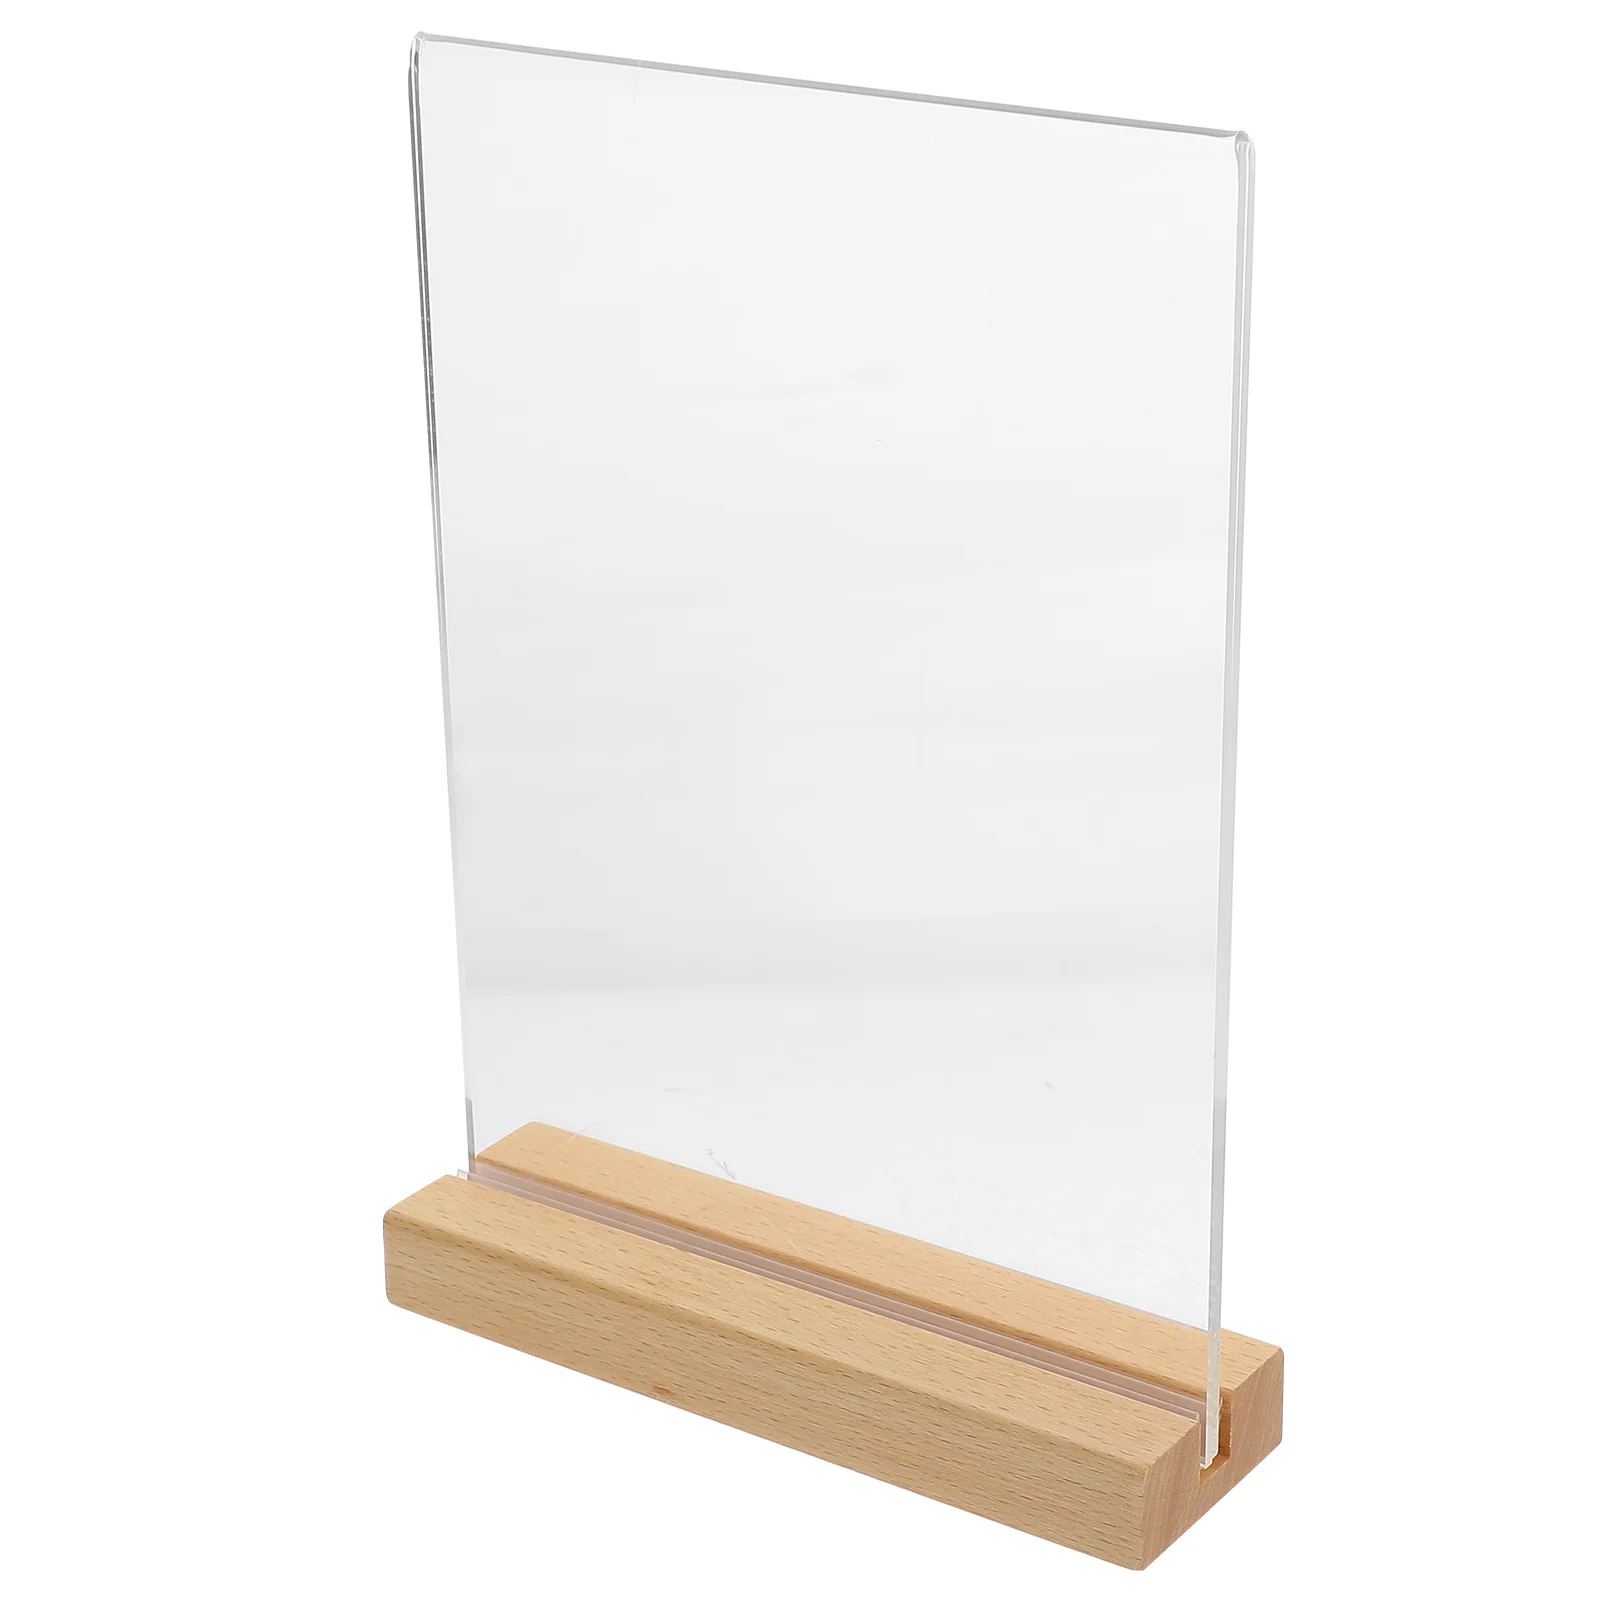 

Blank Clear Table Number Signs Menu Acrylic Display Stand With Wooden Base Place Card Holder For Wedding Party Paper Holder